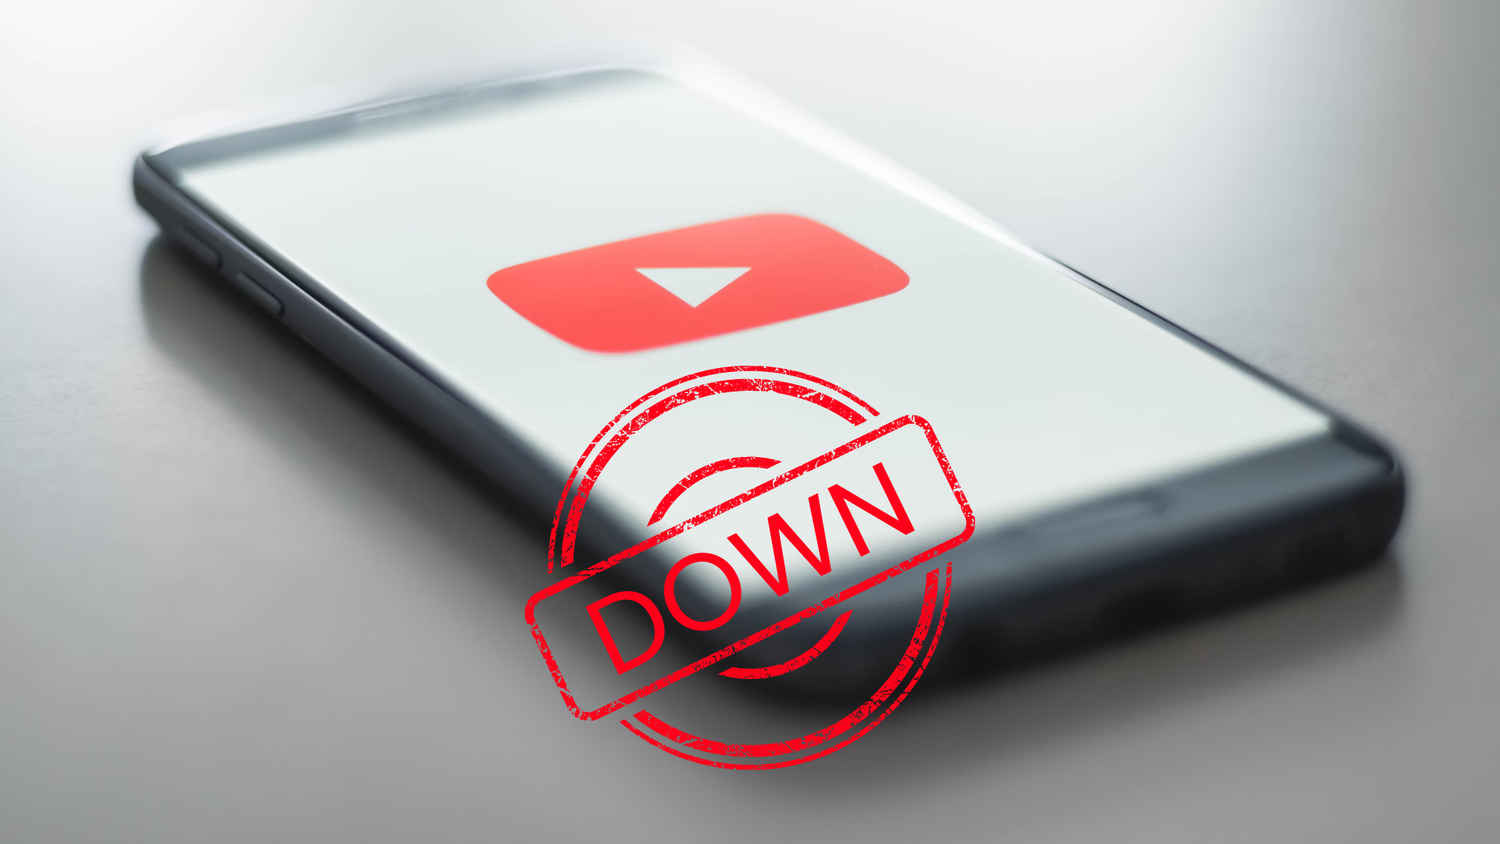 YouTube Down! Users face problems while uploading videos, react on Twitter